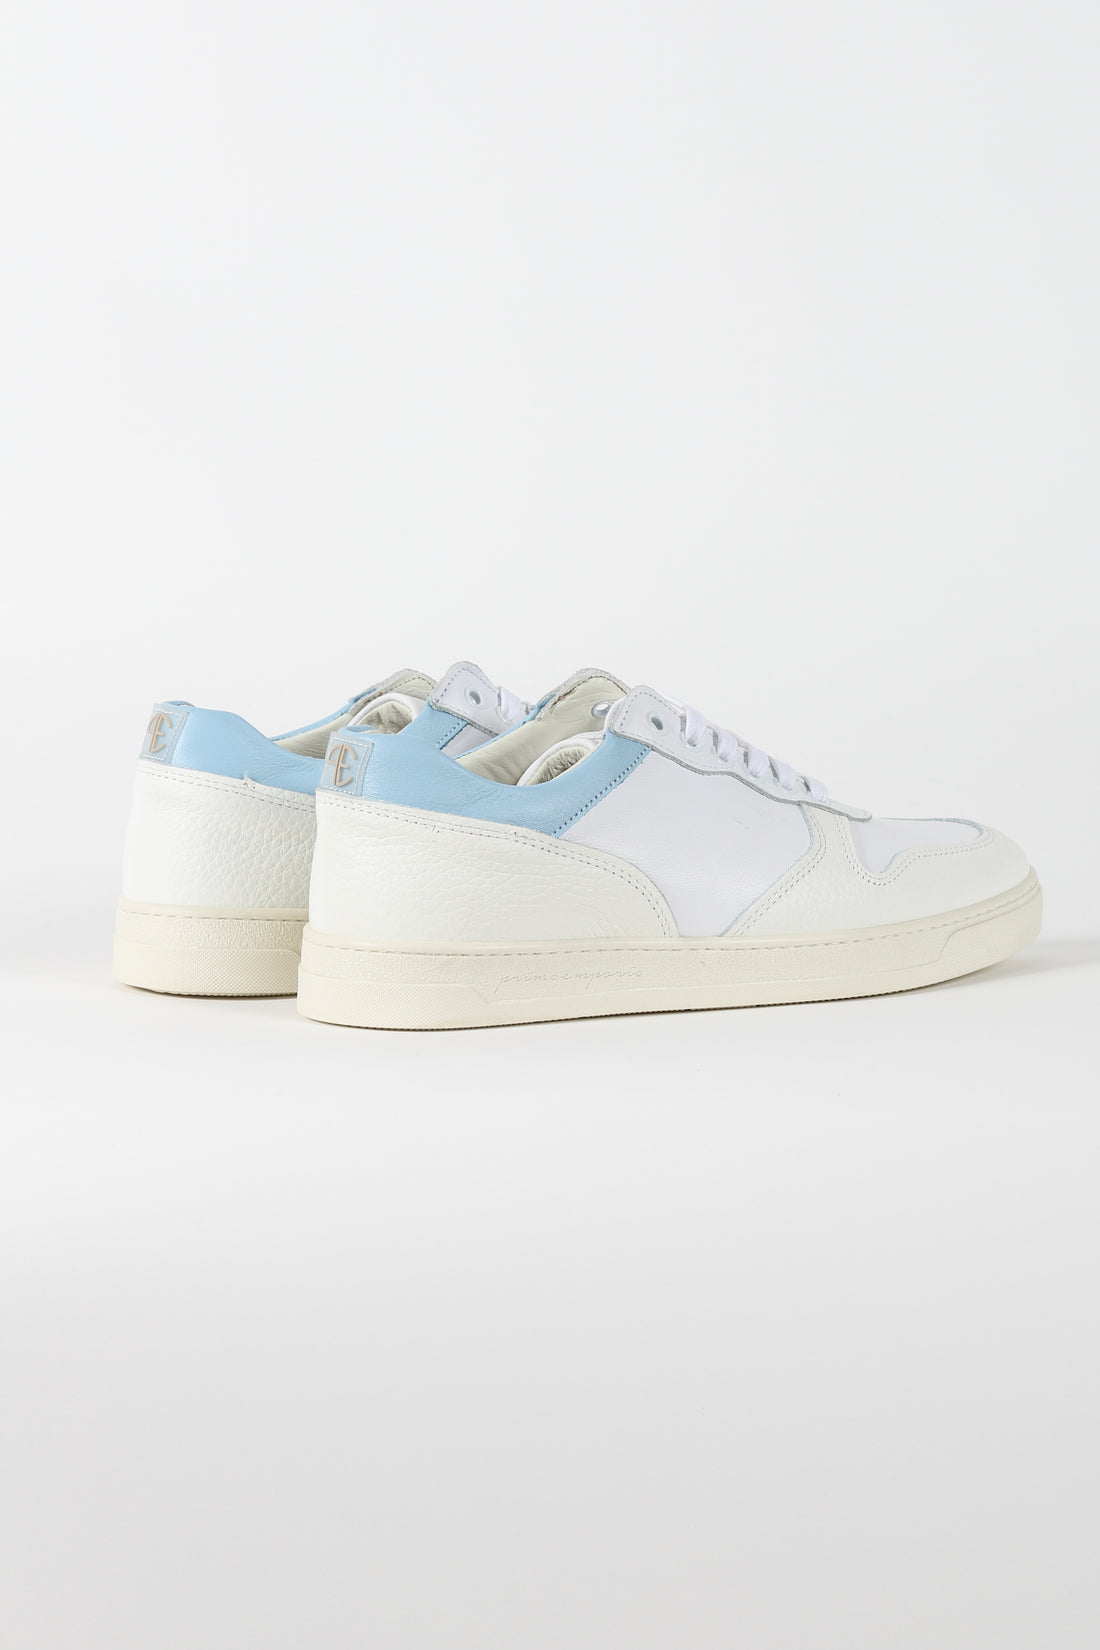 White sneakers Perforated logo on the back. Light blue